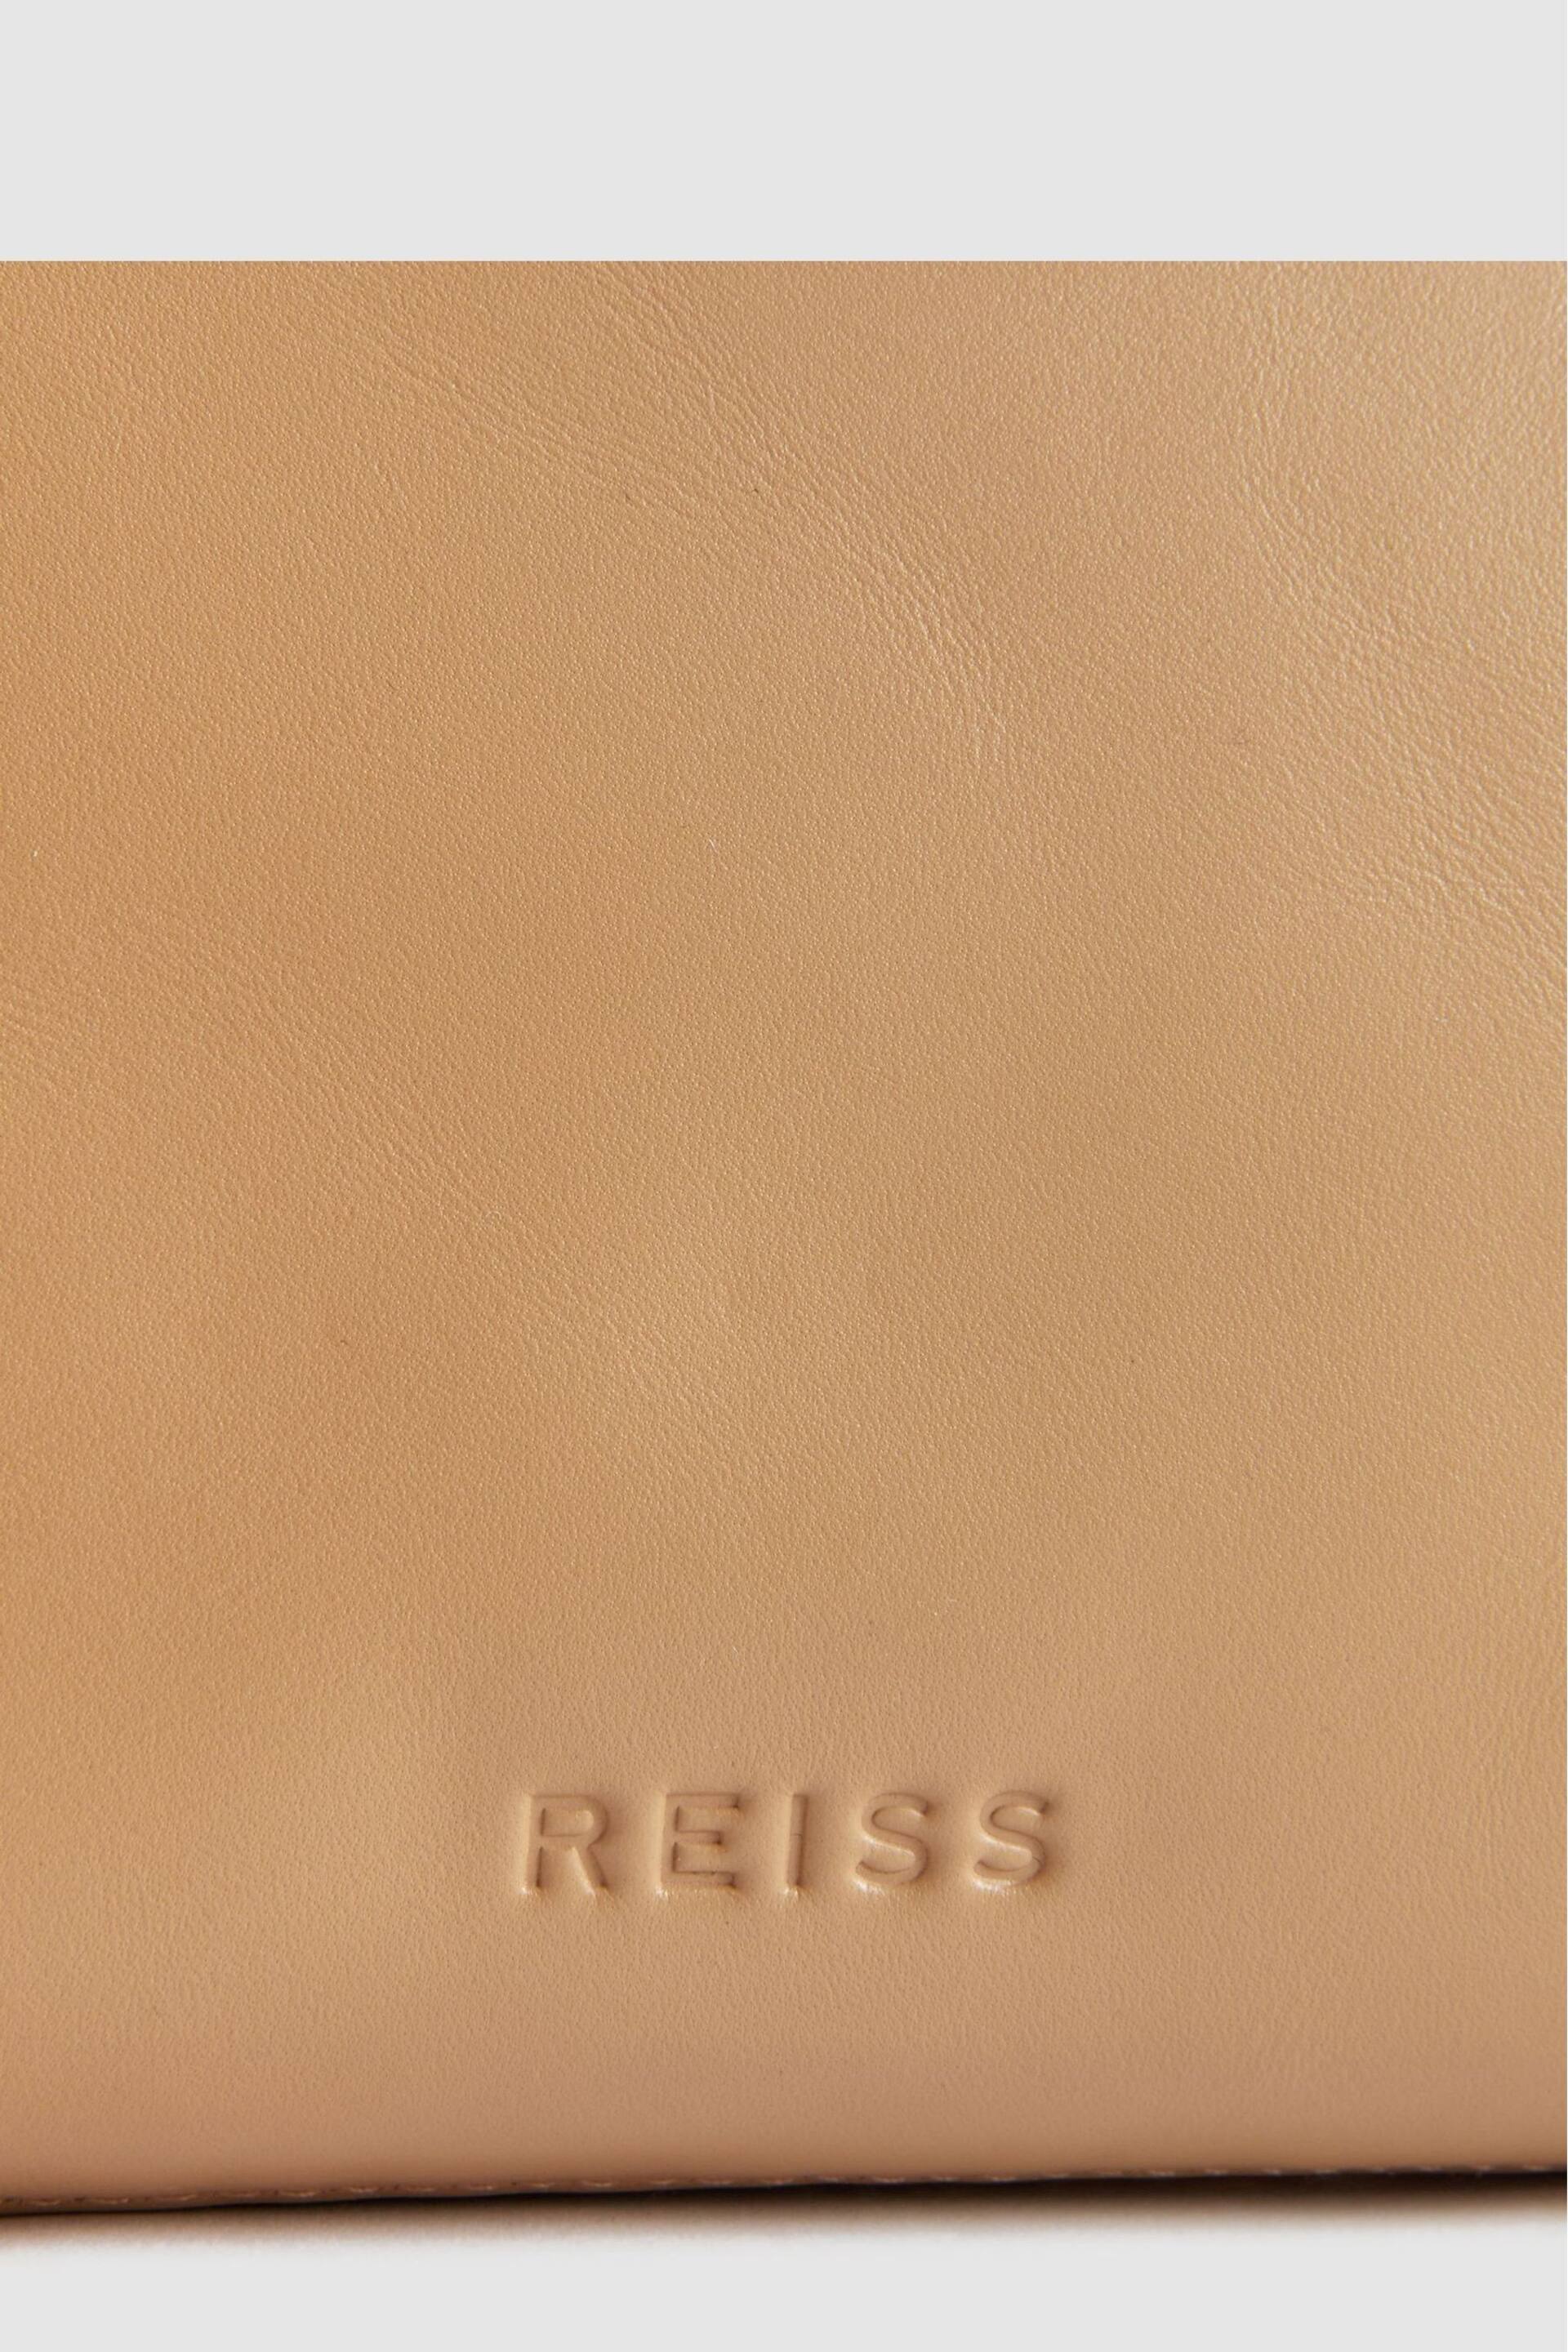 Reiss Tan Brompton Leather Raffia Pouch Bag - Image 6 of 6